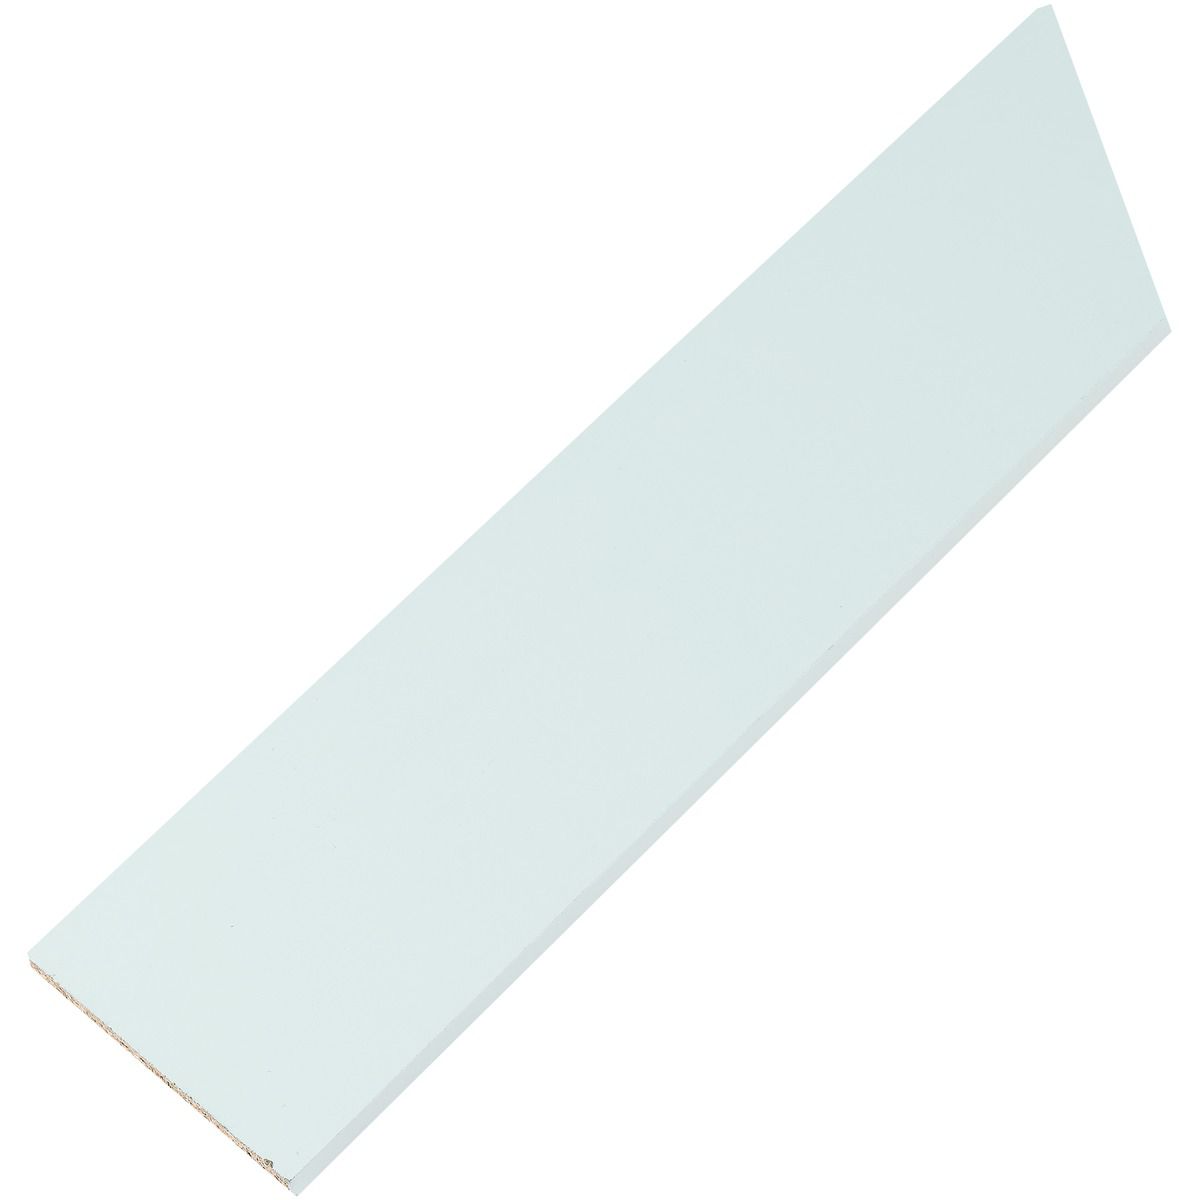 Image of Wickes MFC White Furniture Panel - 18mm x 300mm x 2790mm